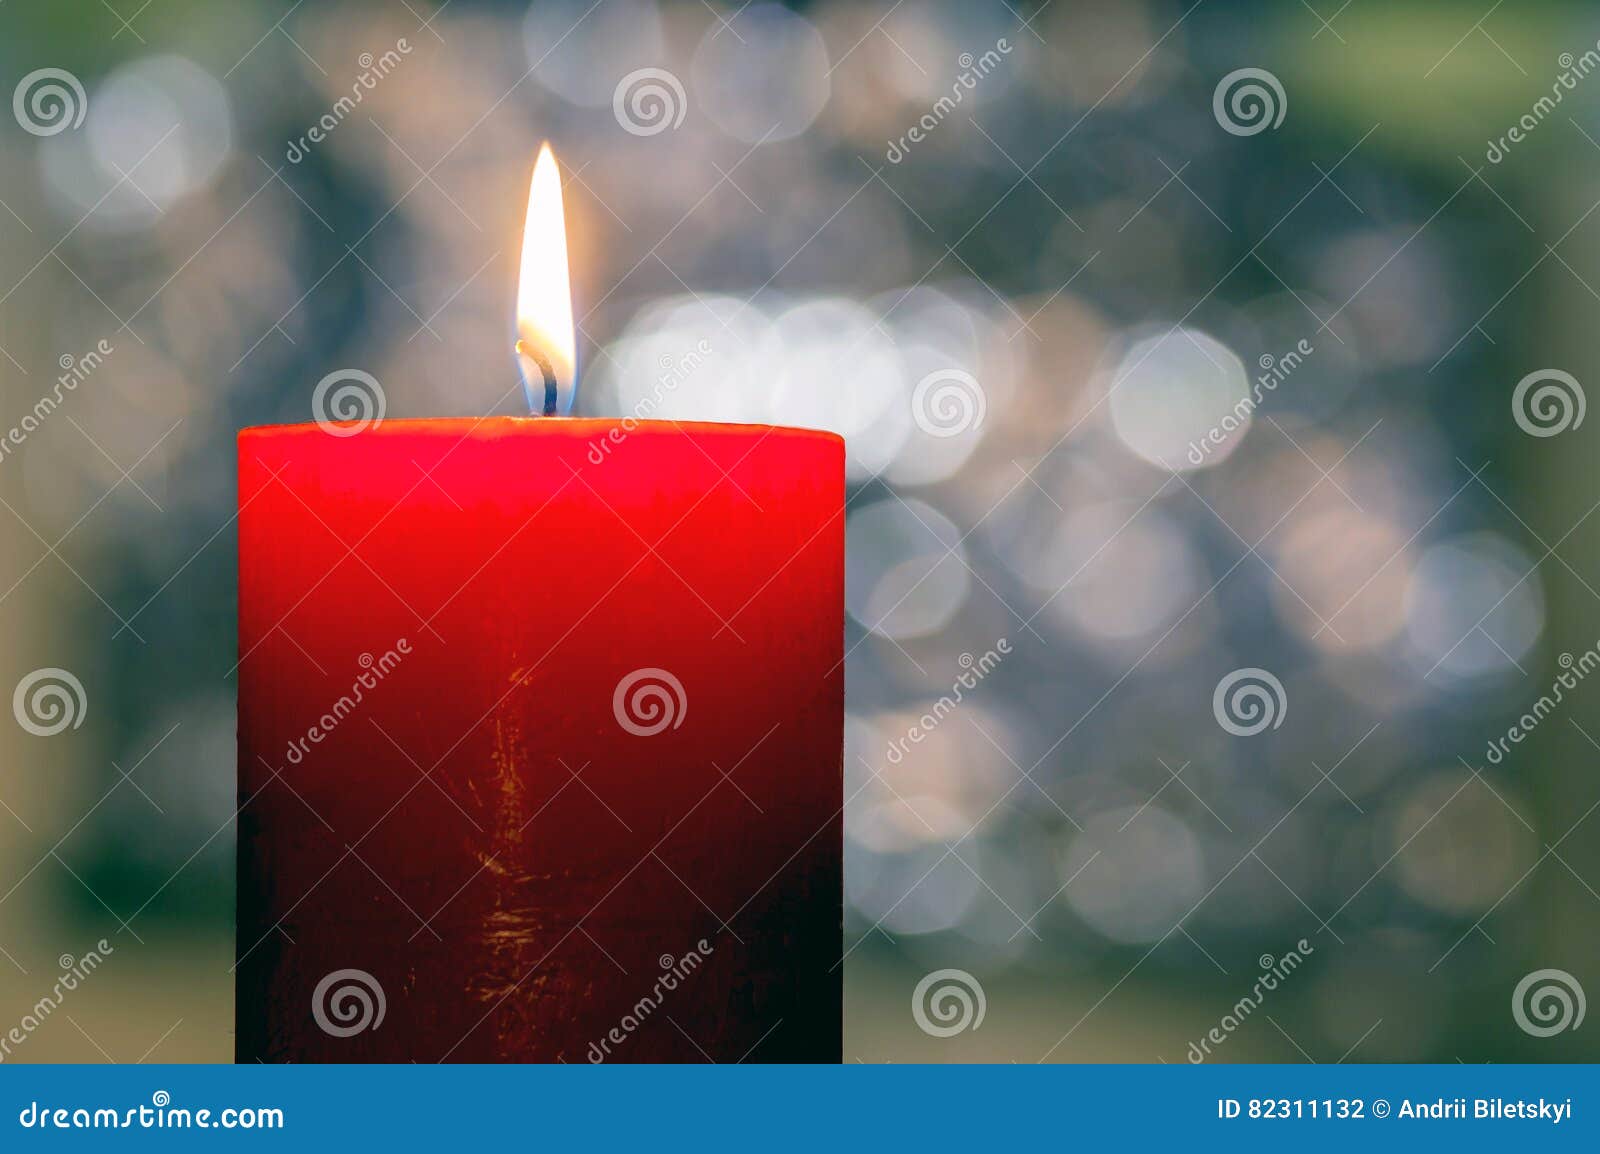 Candles light Christmas candle burning at night Abstract candl Download preview Add to lightbox FREE DOWNLOAD